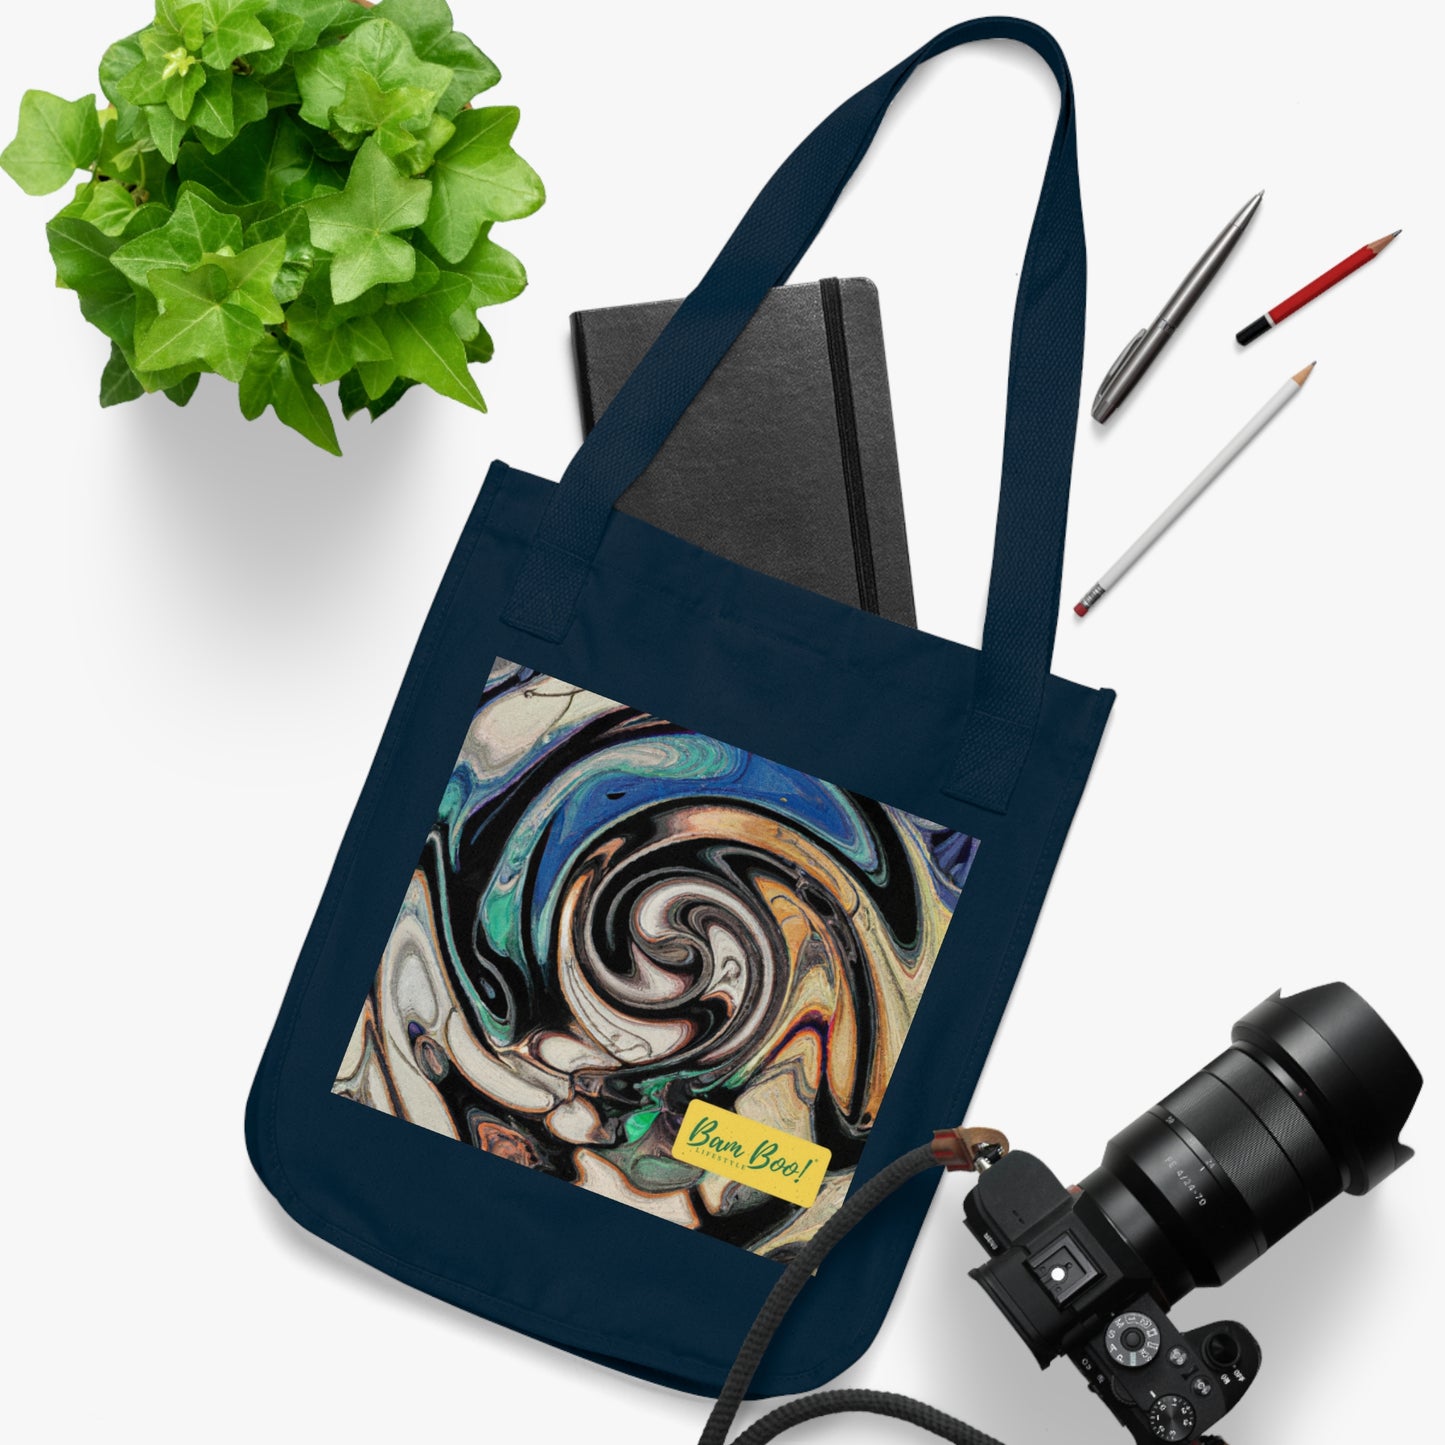 "Digital Disorientation: An Exploration of Digital Distortion Through Image-Editing and Painting". - Bam Boo! Lifestyle Eco-friendly Tote Bag